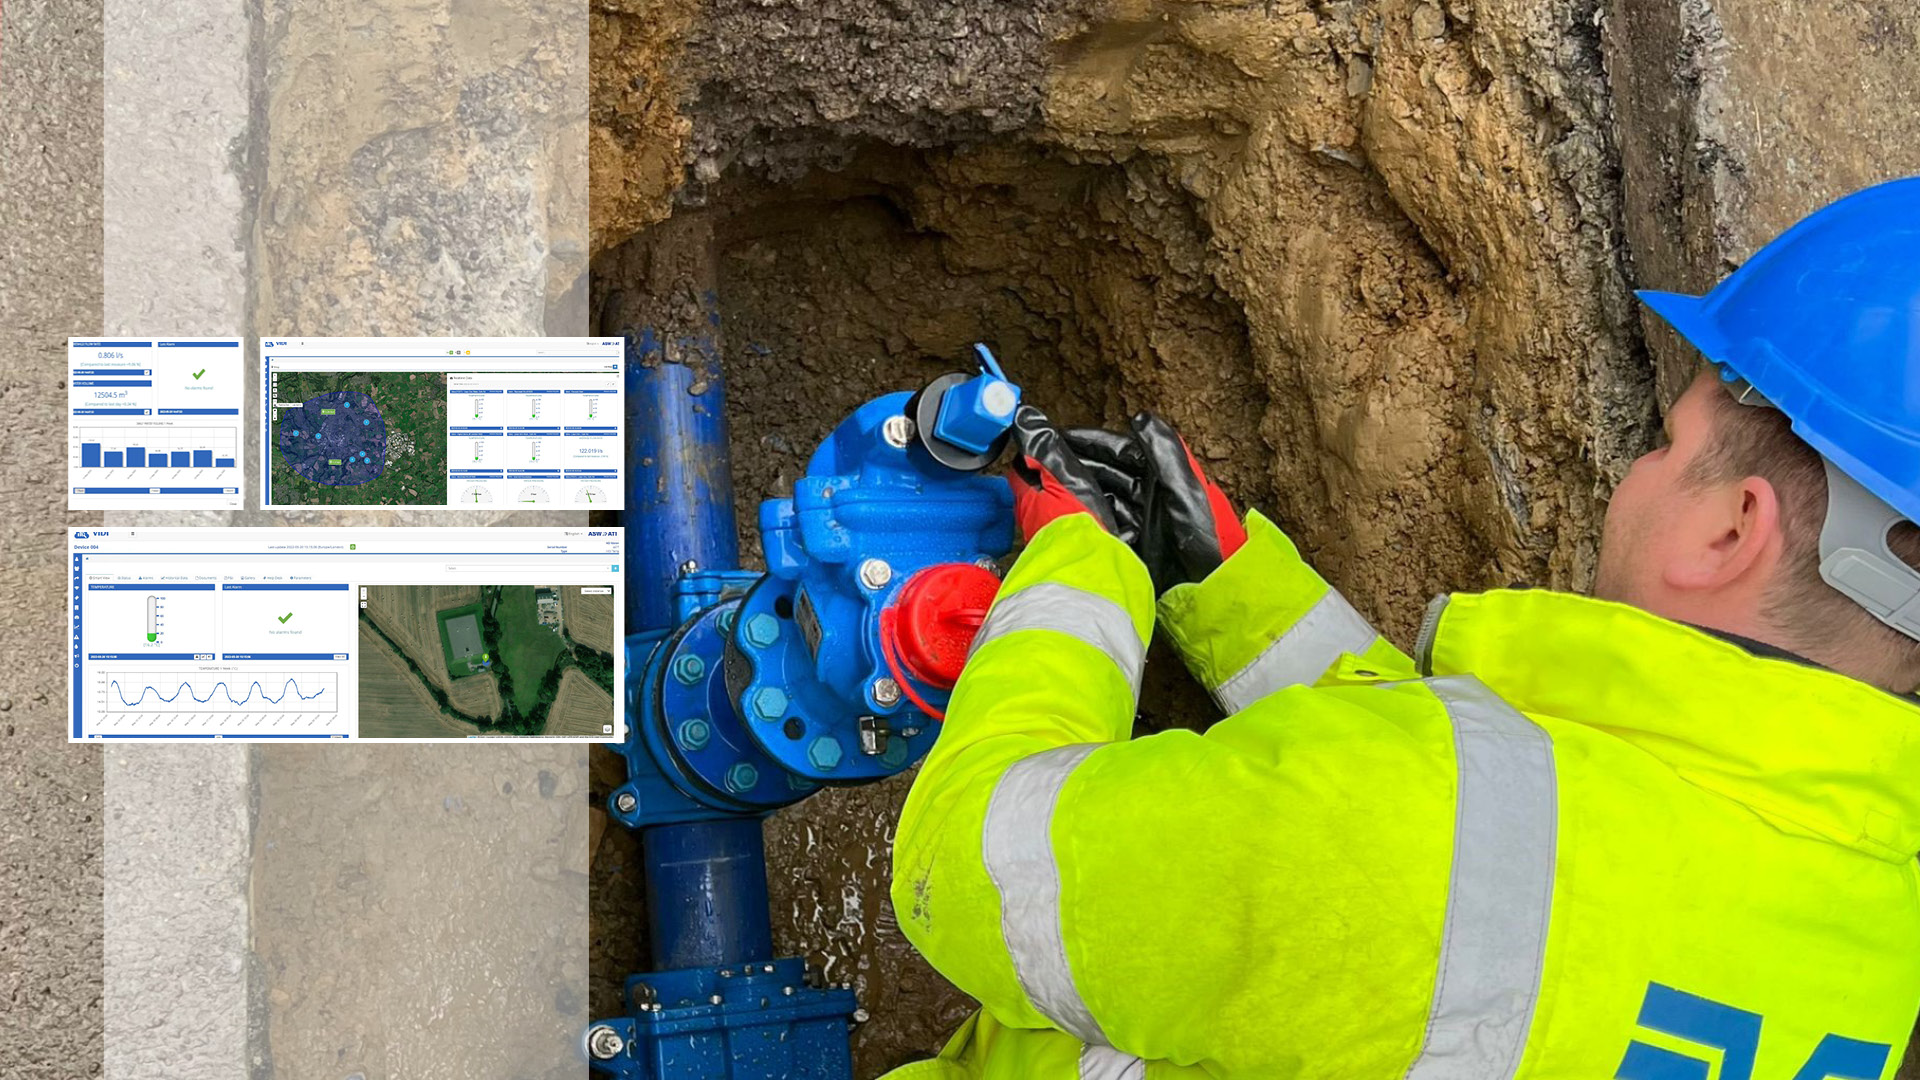 Smart Water Gate Valve and Hydrant Case Study in Wrexham using VIDI positioners to monitor activity in water network